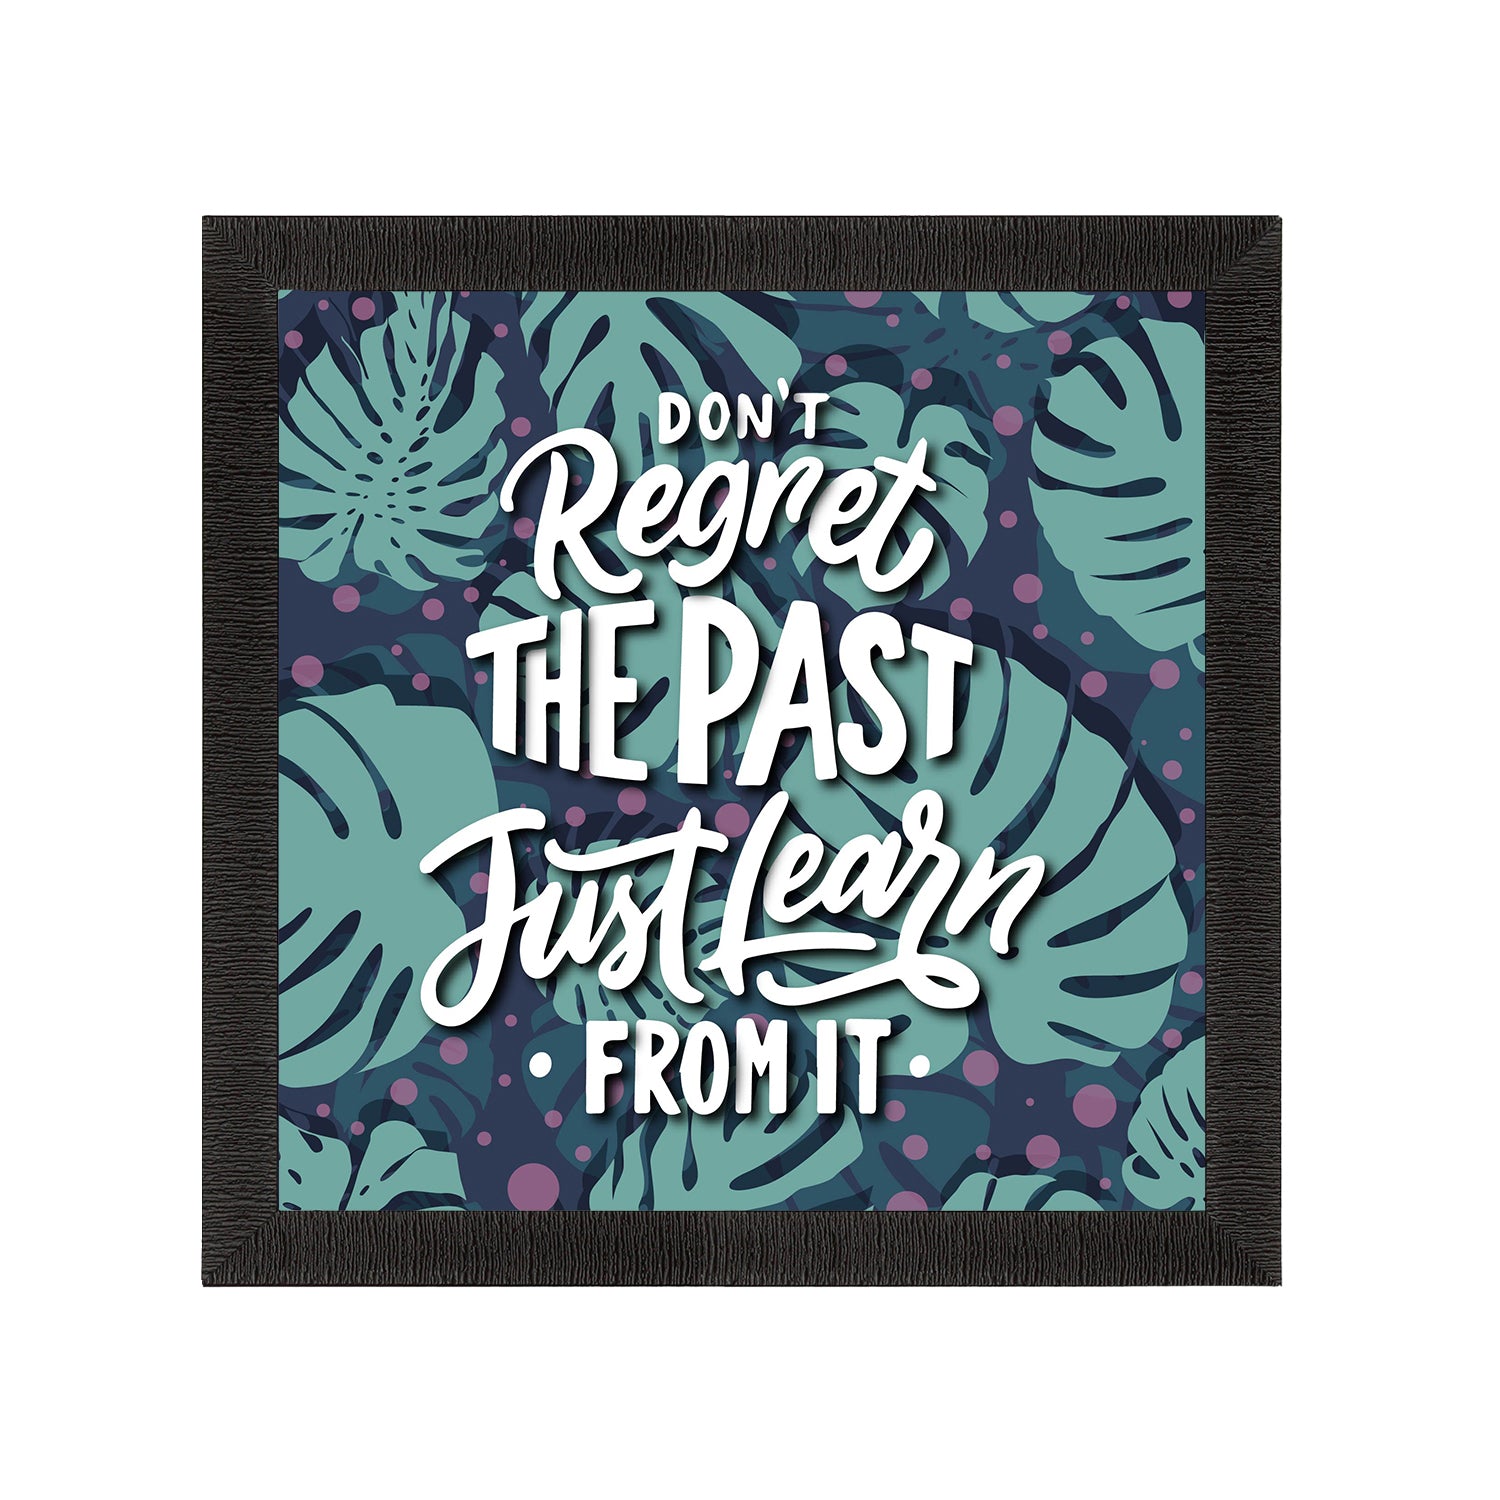 "Don’t Regret The Past Just Learn From It" Motivational Quote Satin Matt Texture UV Art Painting